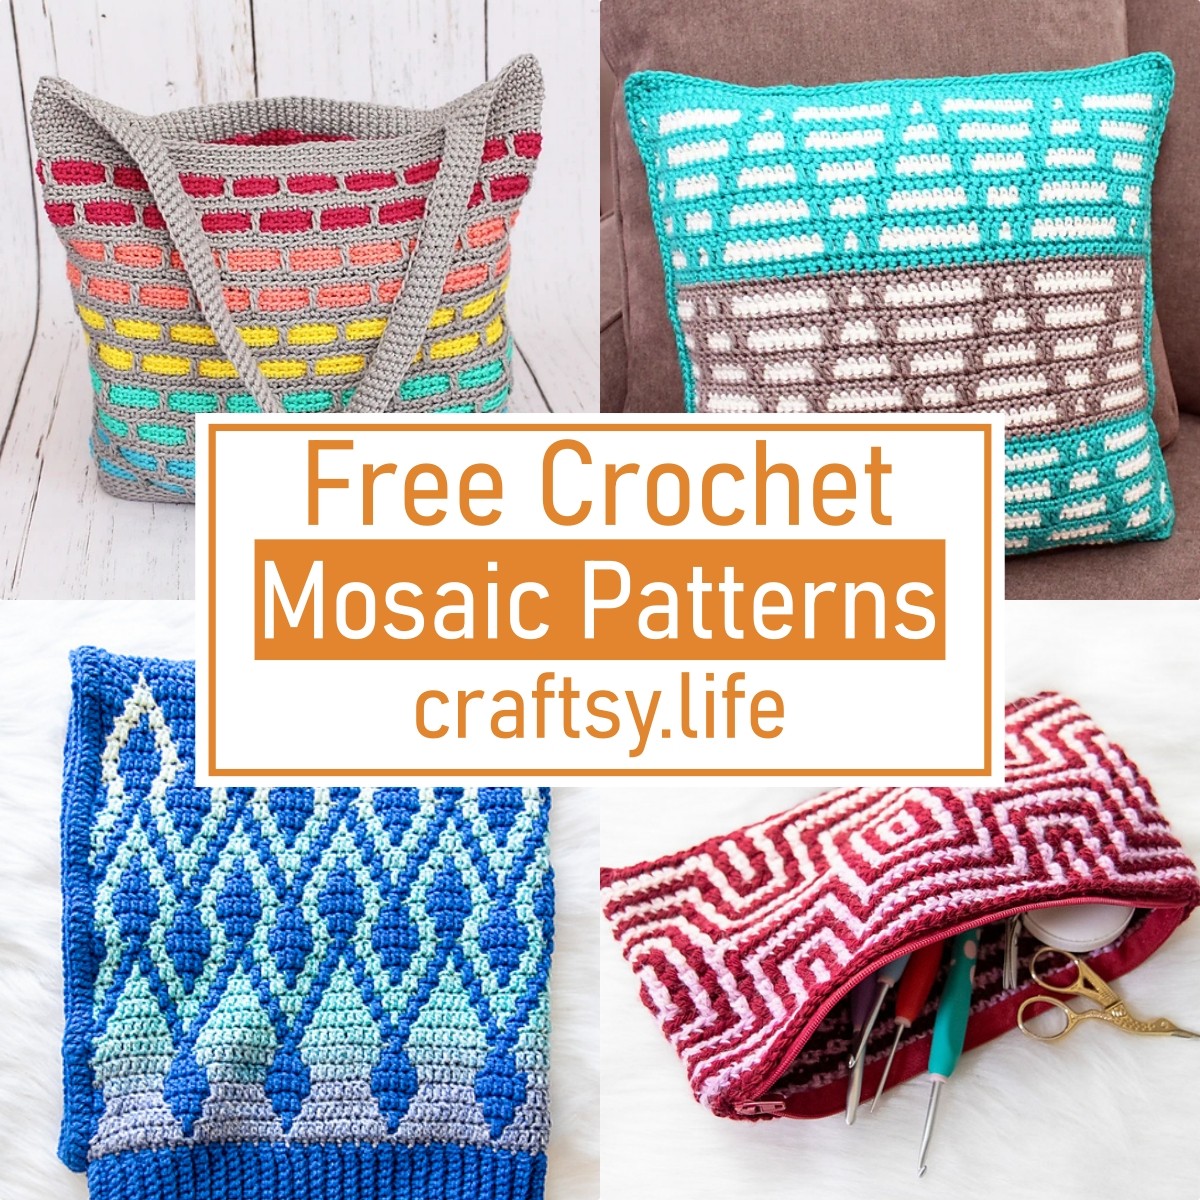 30 Free Crochet Monster Patterns For Fun - Craftsy